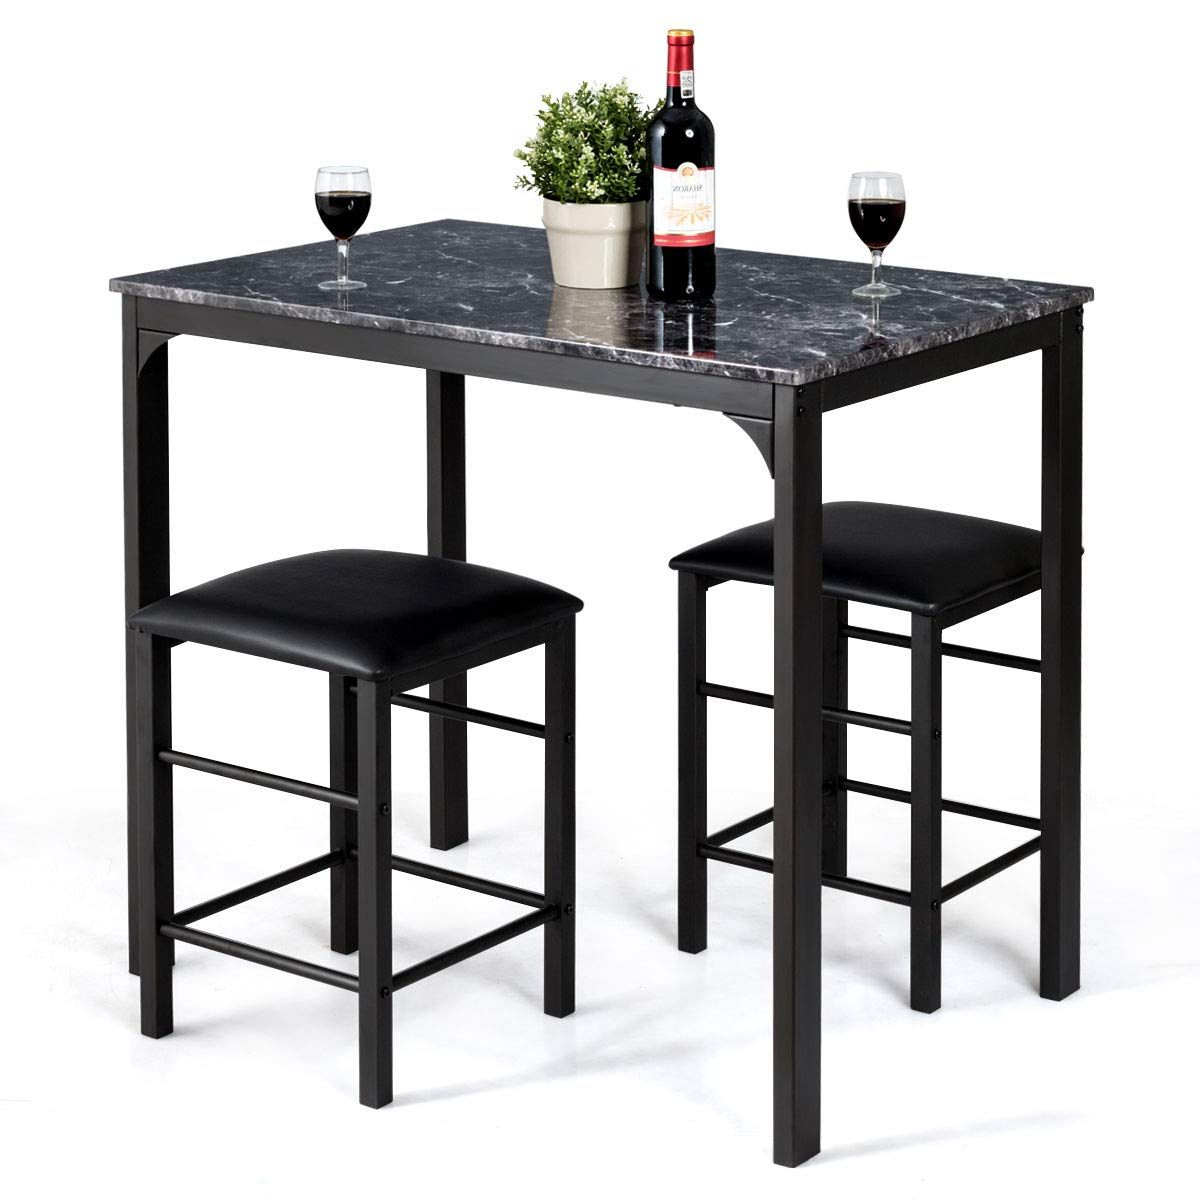 Most Popular Giantex 3 Pcs Dining Table And Chairs Set With Faux Marble Tabletop 2  Chairs Contemporary Dining Table Set For Home Or Hotel Dining Room, Kitchen  Or Inside Faux Marble Finish Metal Contemporary Dining Tables (View 11 of 30)